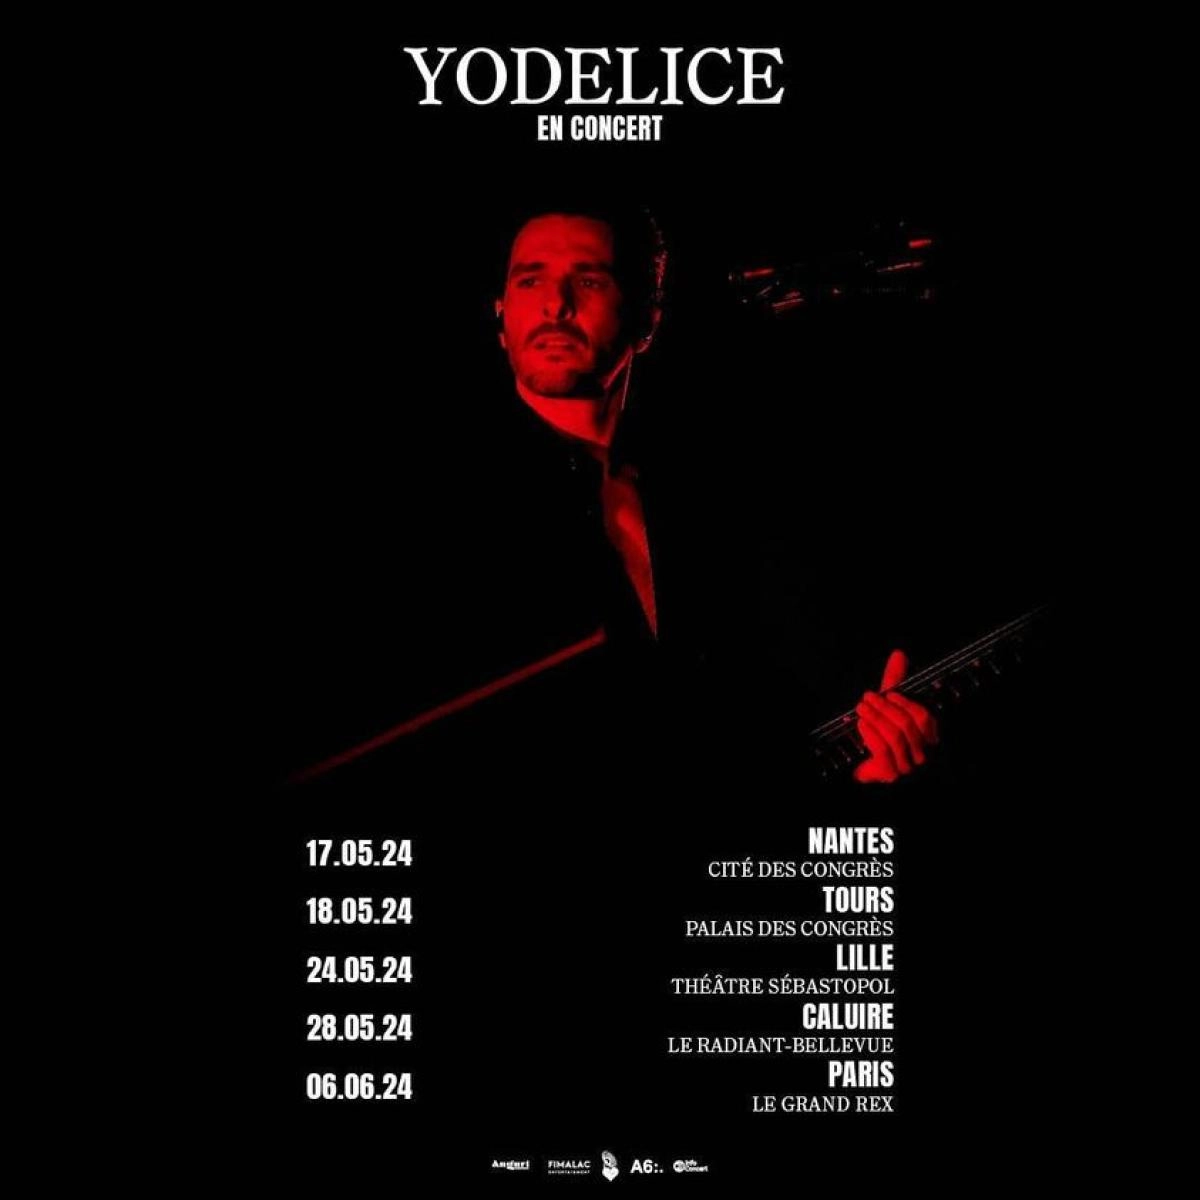 Yodelice in der Le Grand Rex Tickets